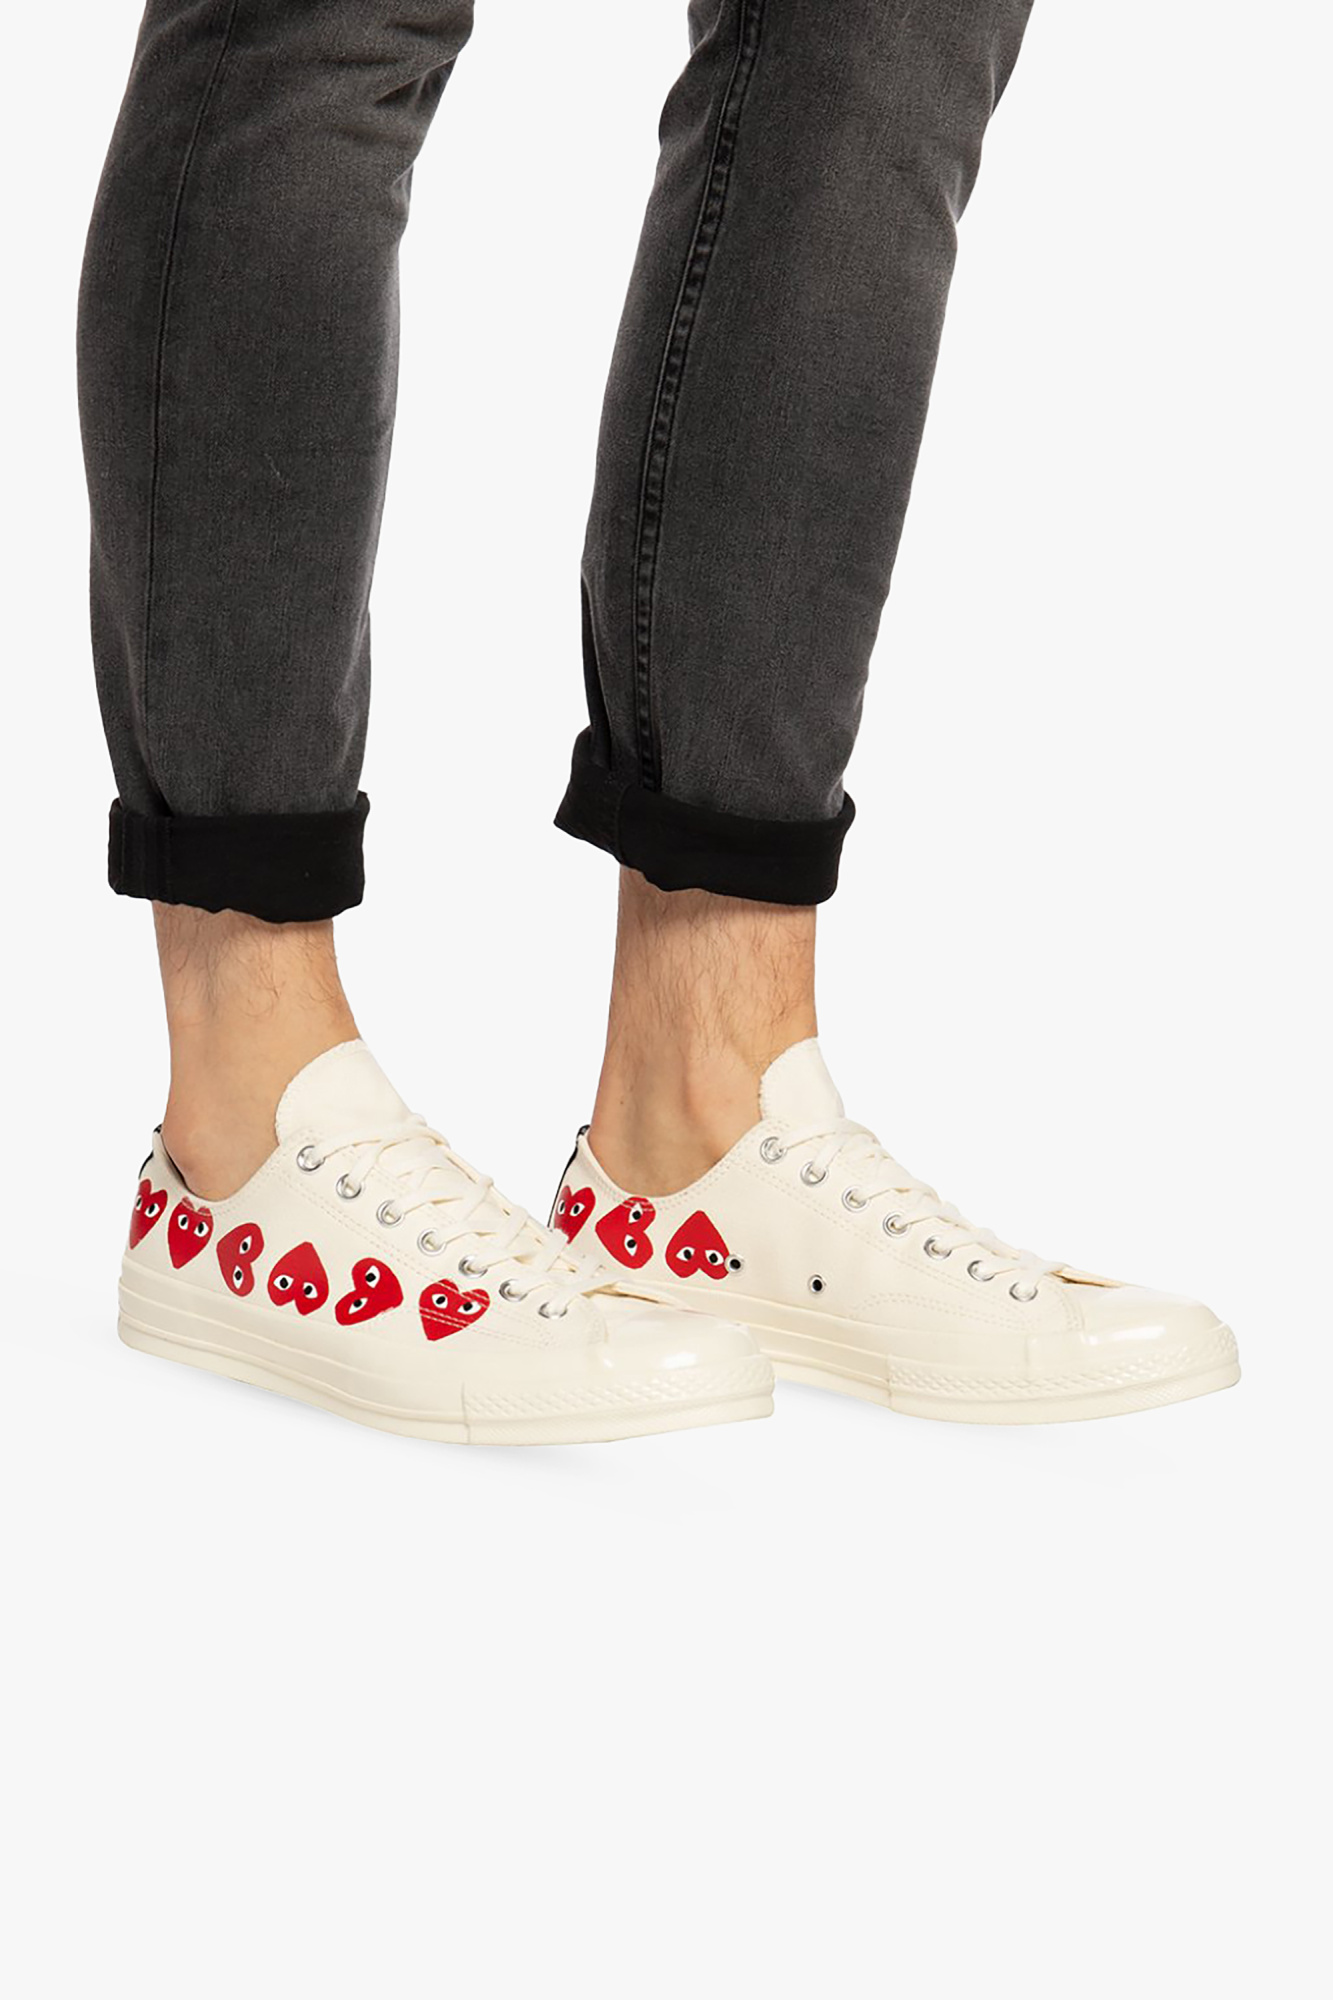 Buy > converse comme des garcons on feet > in stock